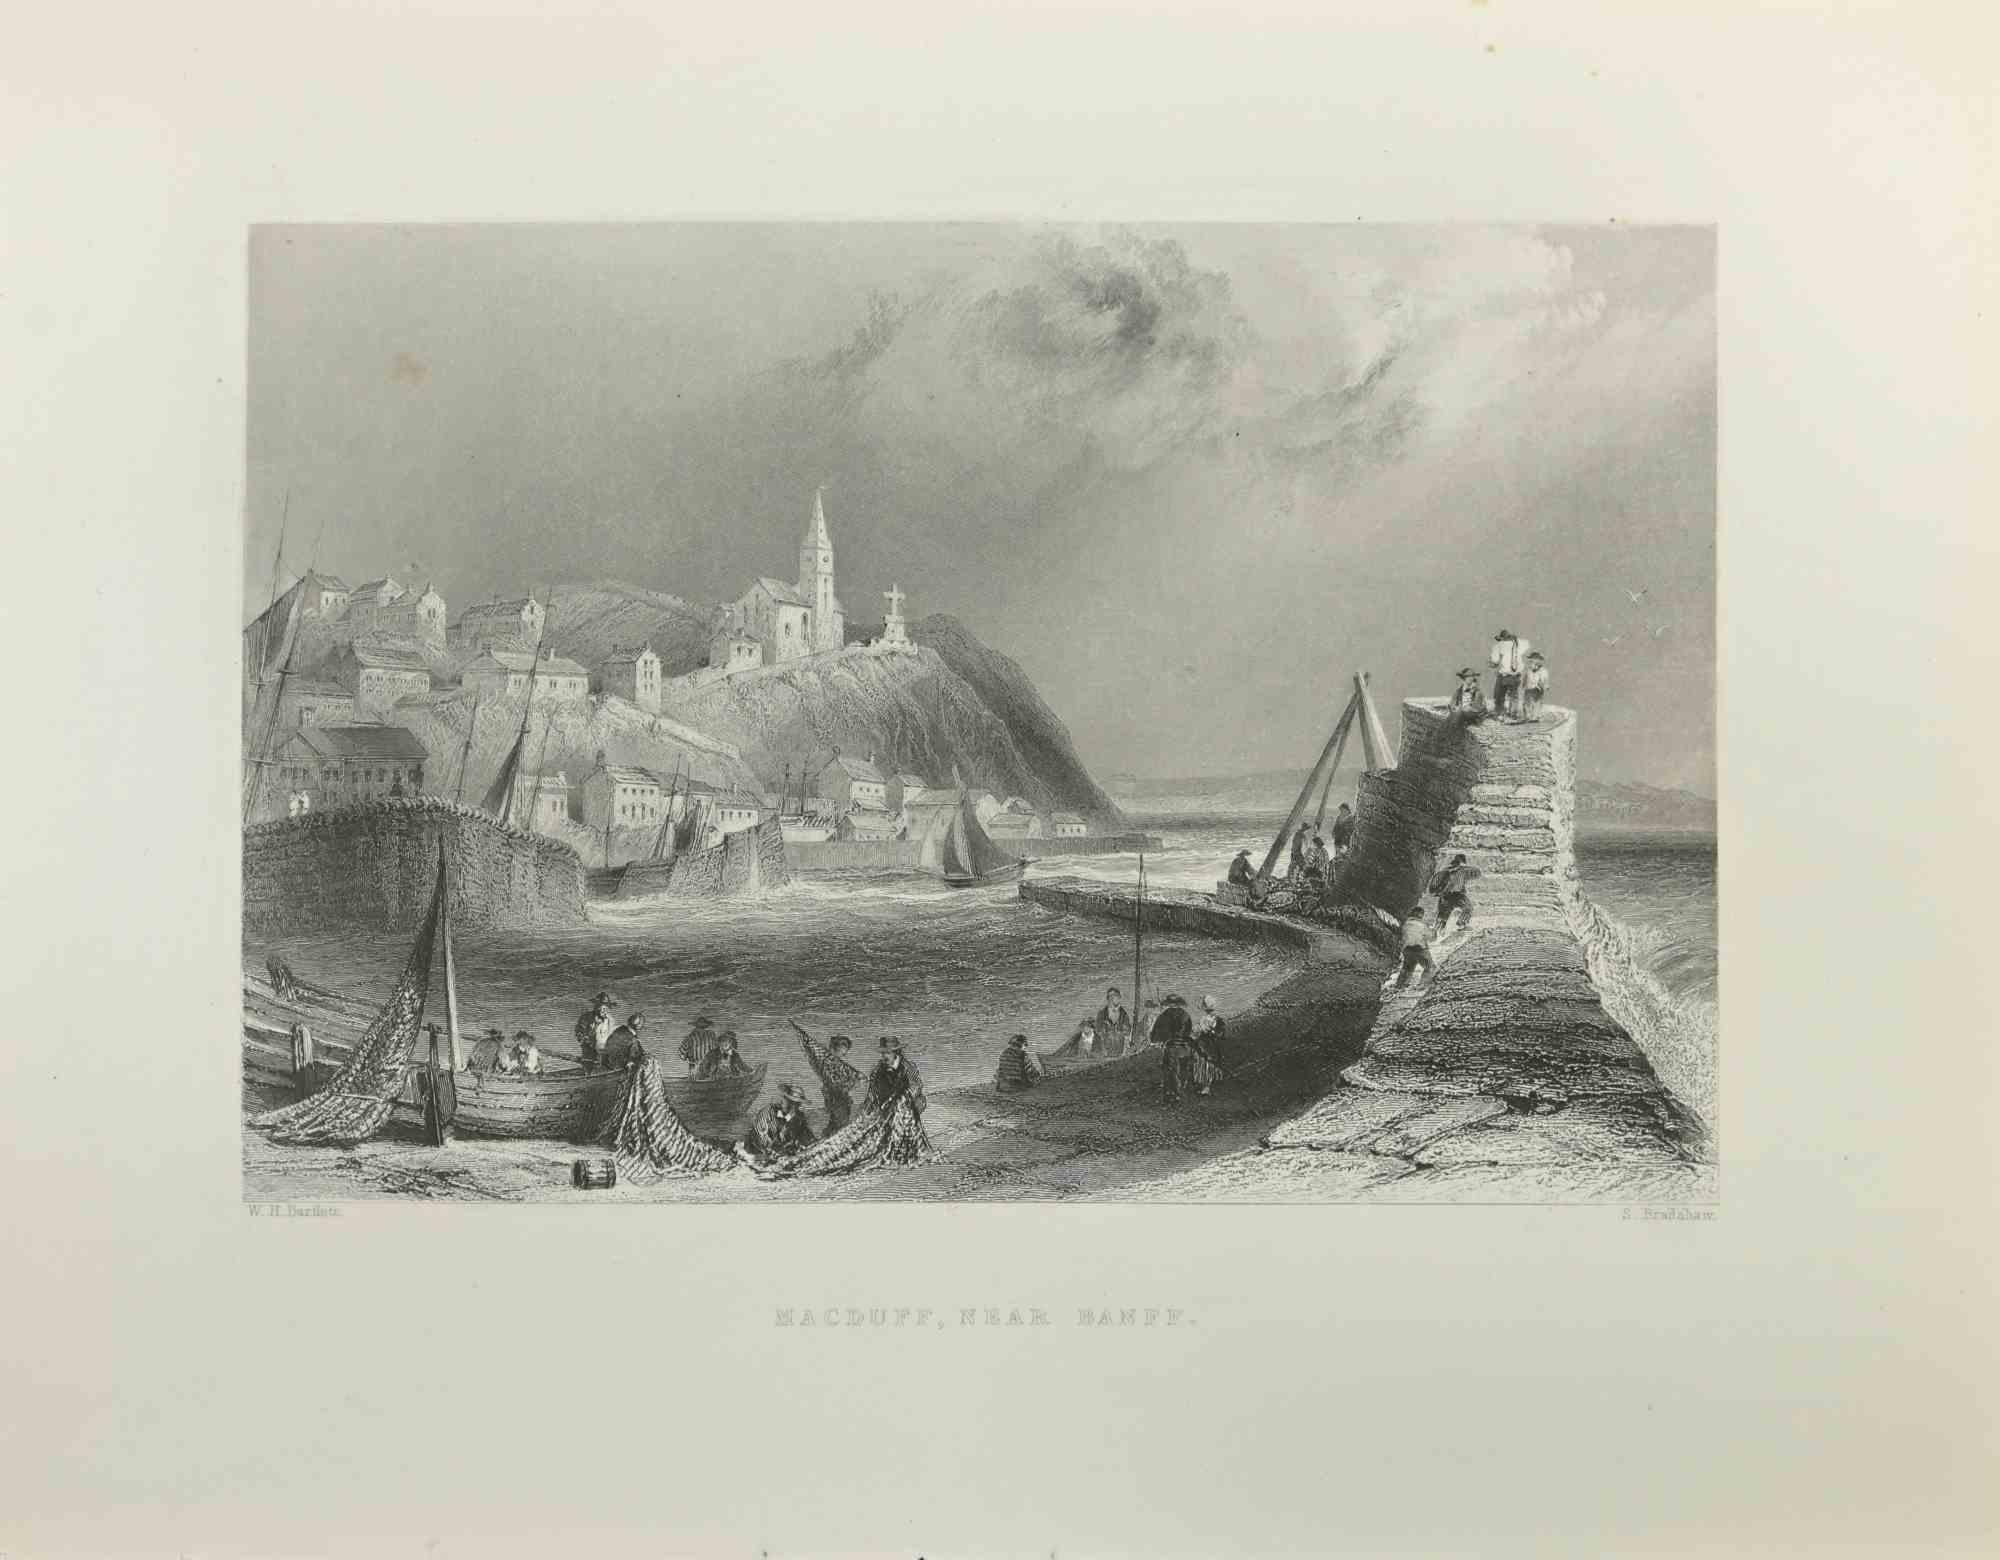 Macduff, Near Banff is an  etching realized in 1845 by Samuel Bradshaw.

Signed in plate.

The artwork is realized in a well-balanced composition.